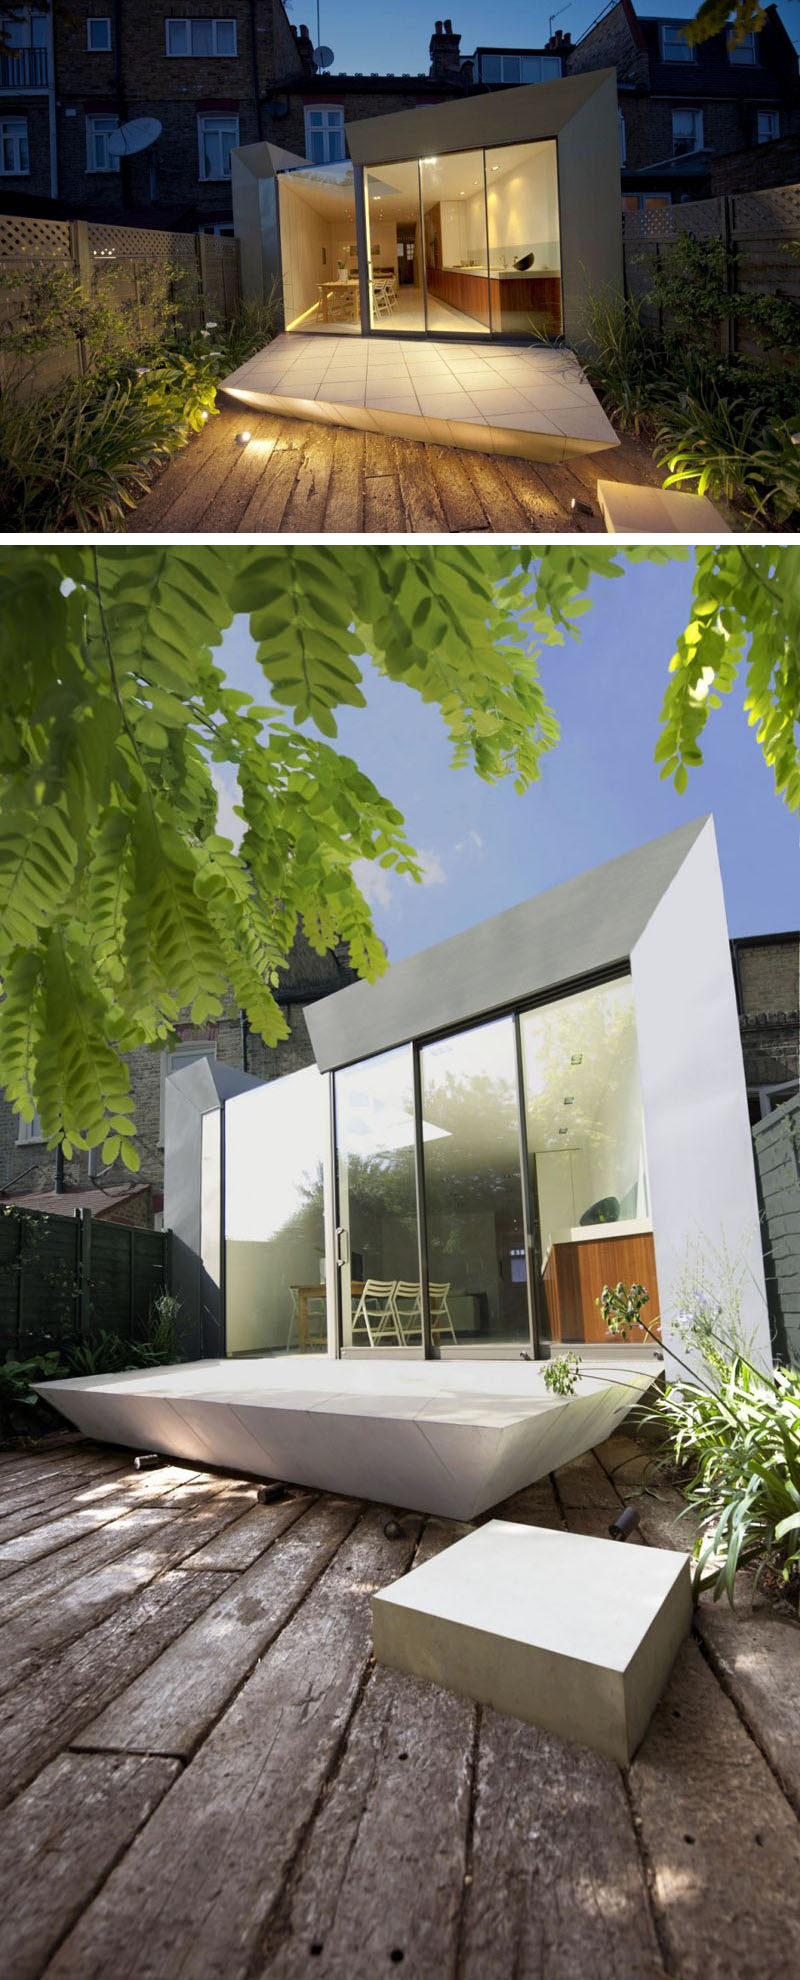 14 Examples Of British Houses With Contemporary Extensions // An angular extension on this British home adds a geometric touch to the home and makes more use of the long backyard.